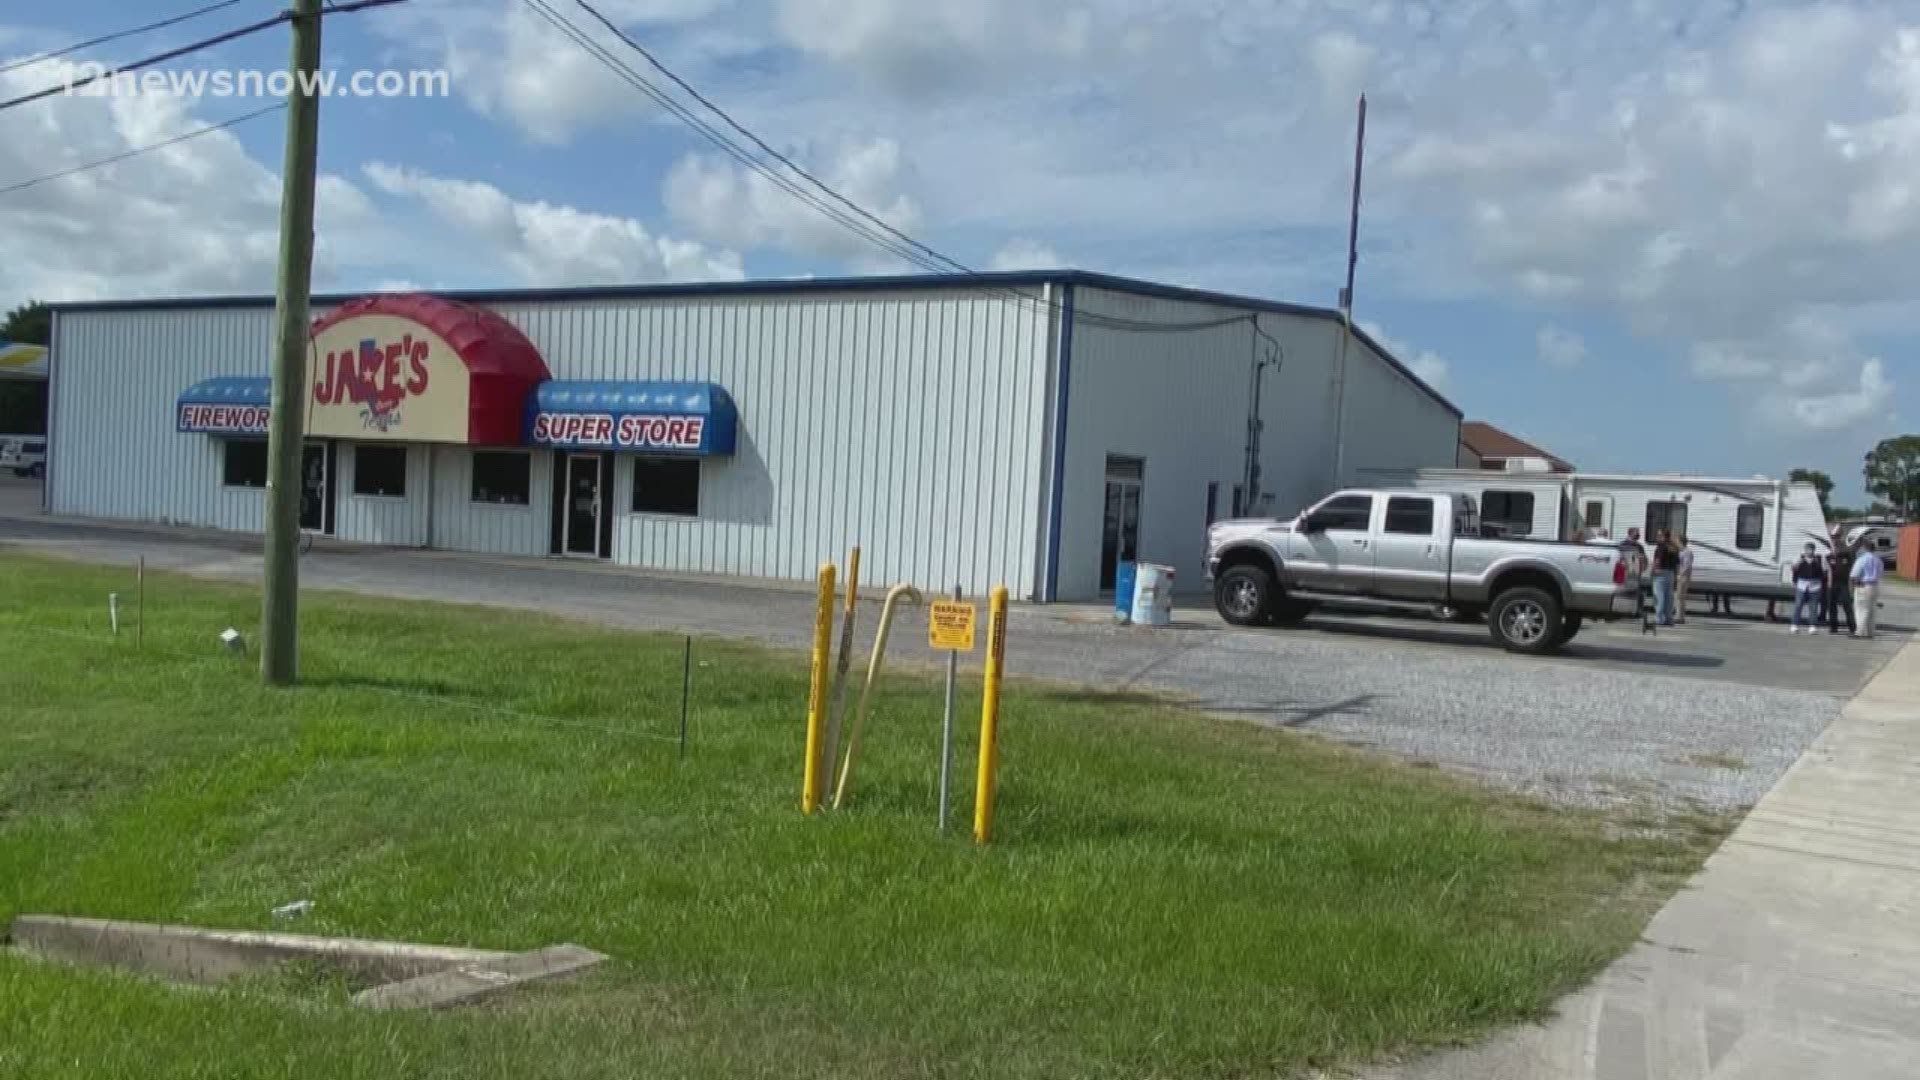 Eight people were arrested on Wednesday in connection with a federal raid at Jake's Fireworks on Twin City Highway